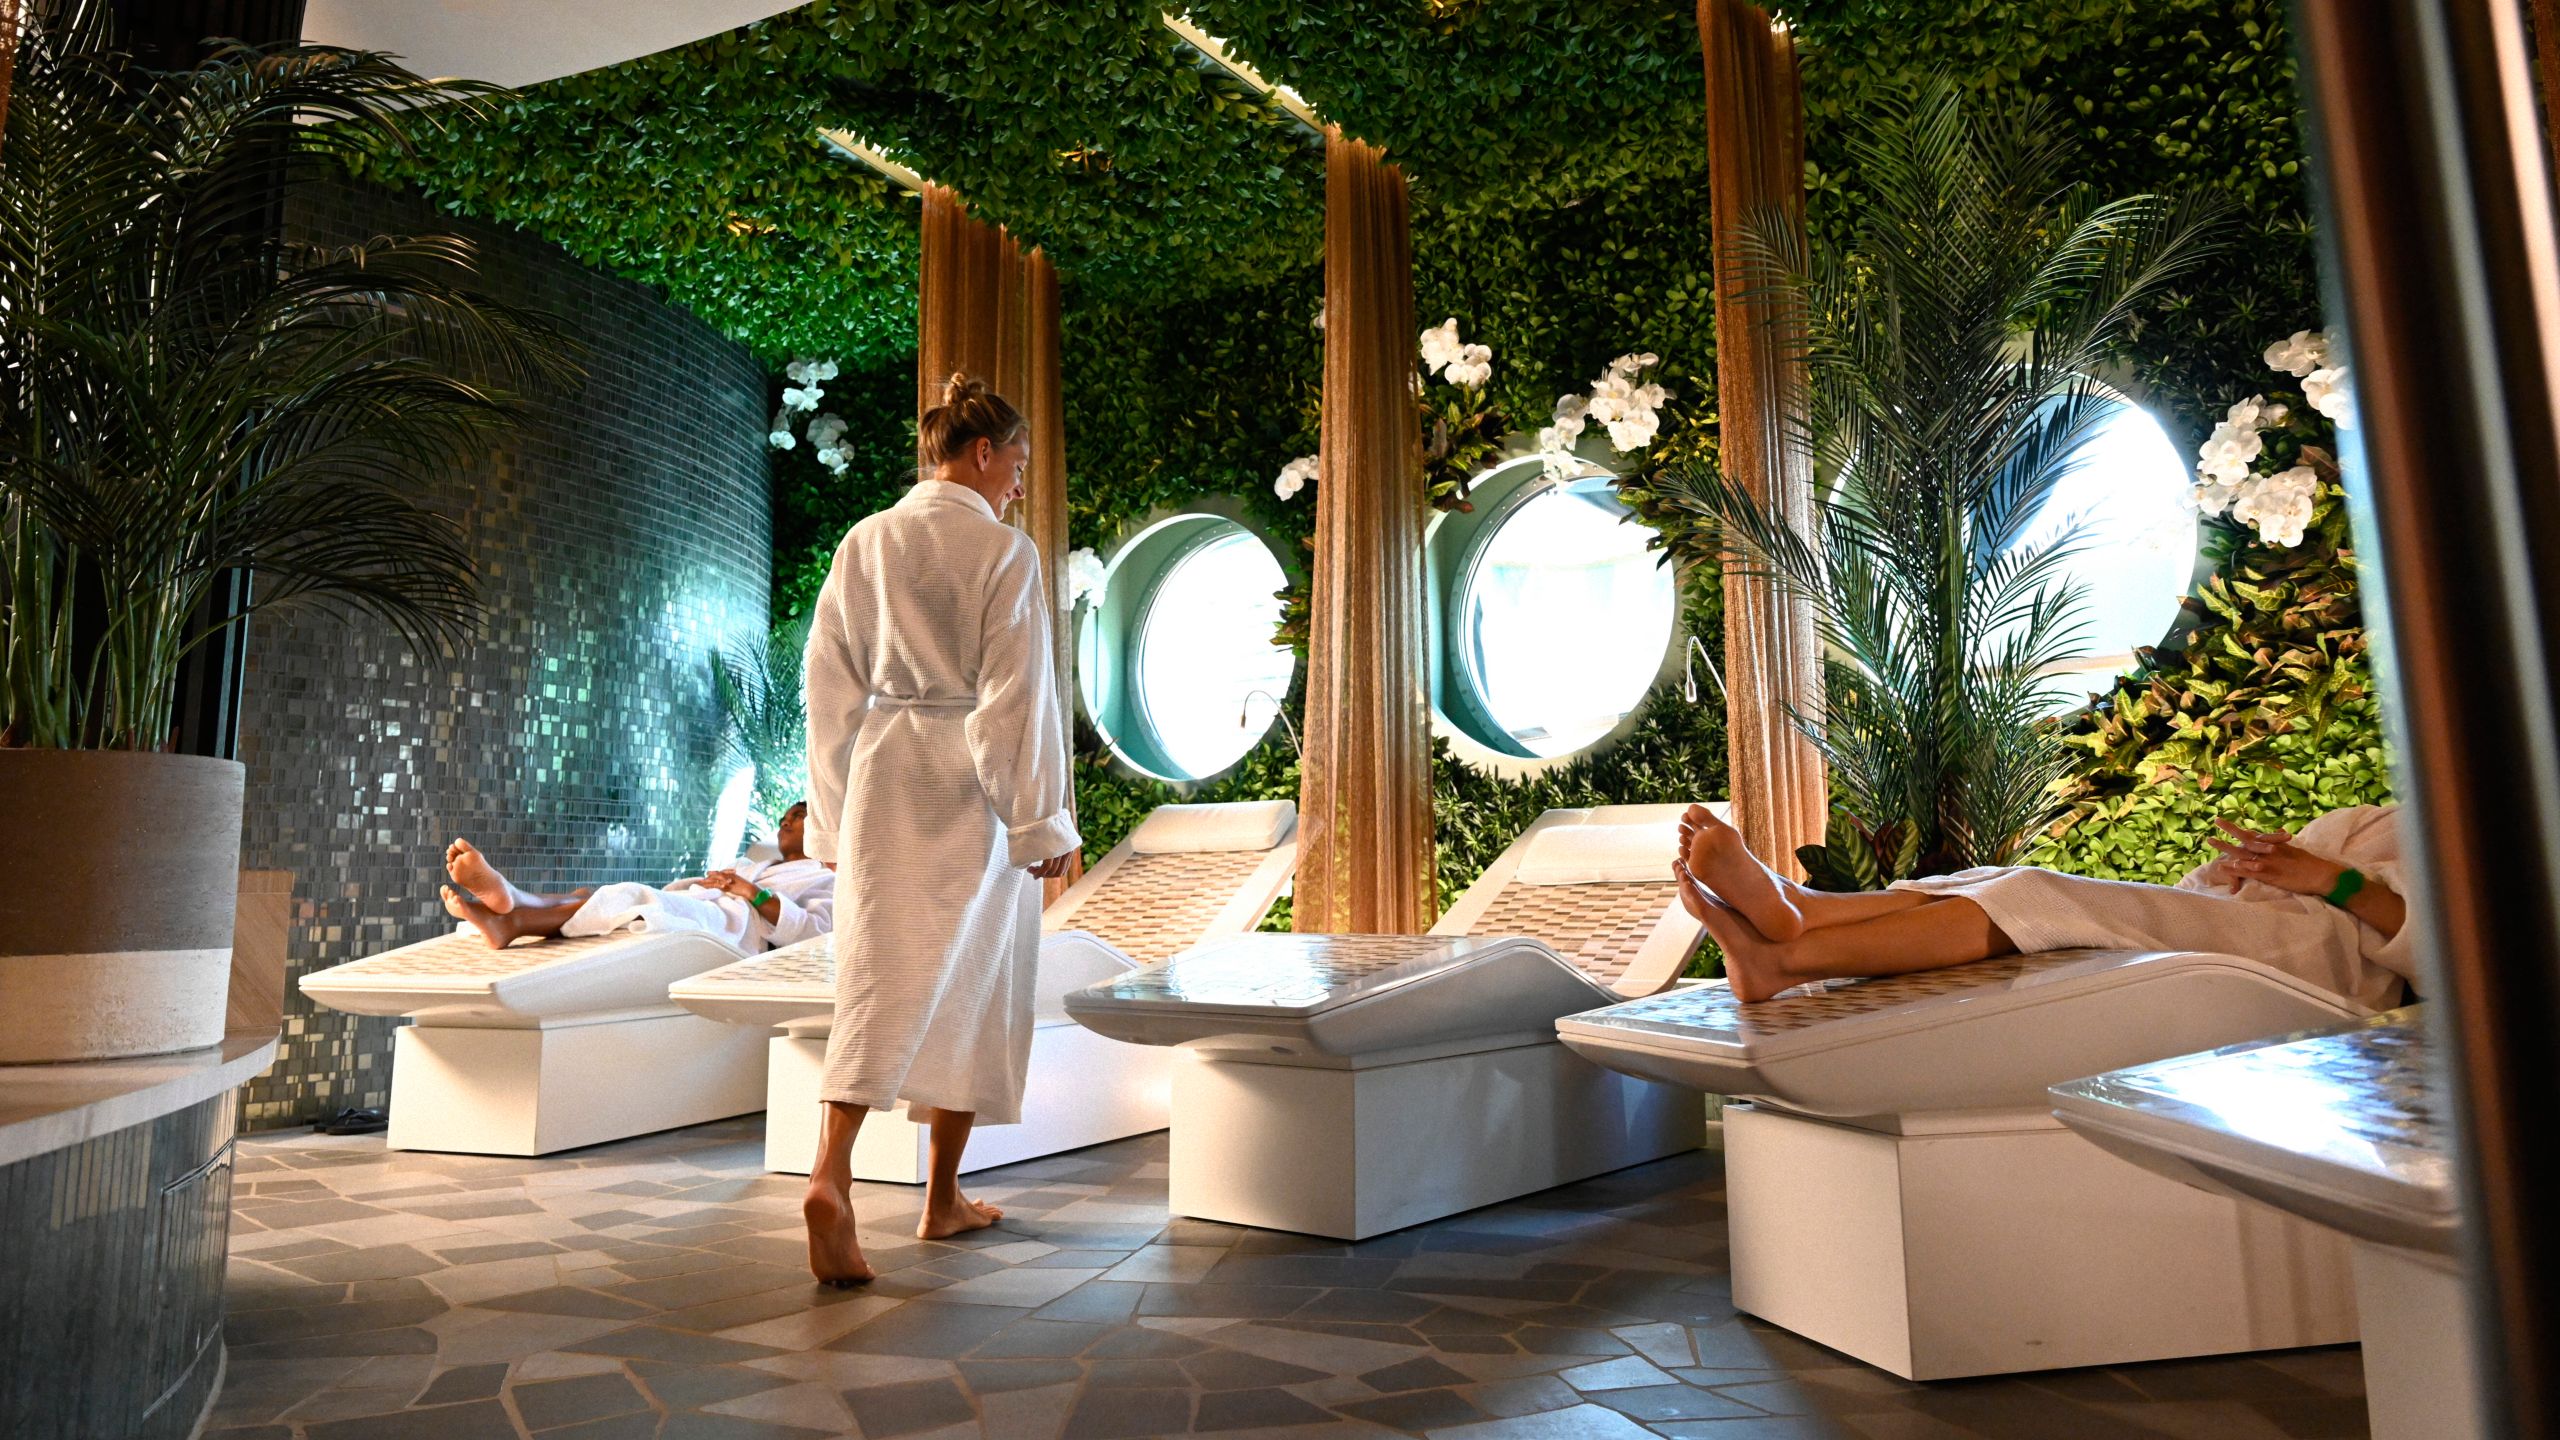 Guests relaxing in a spa setting decorated to look like a rainforest